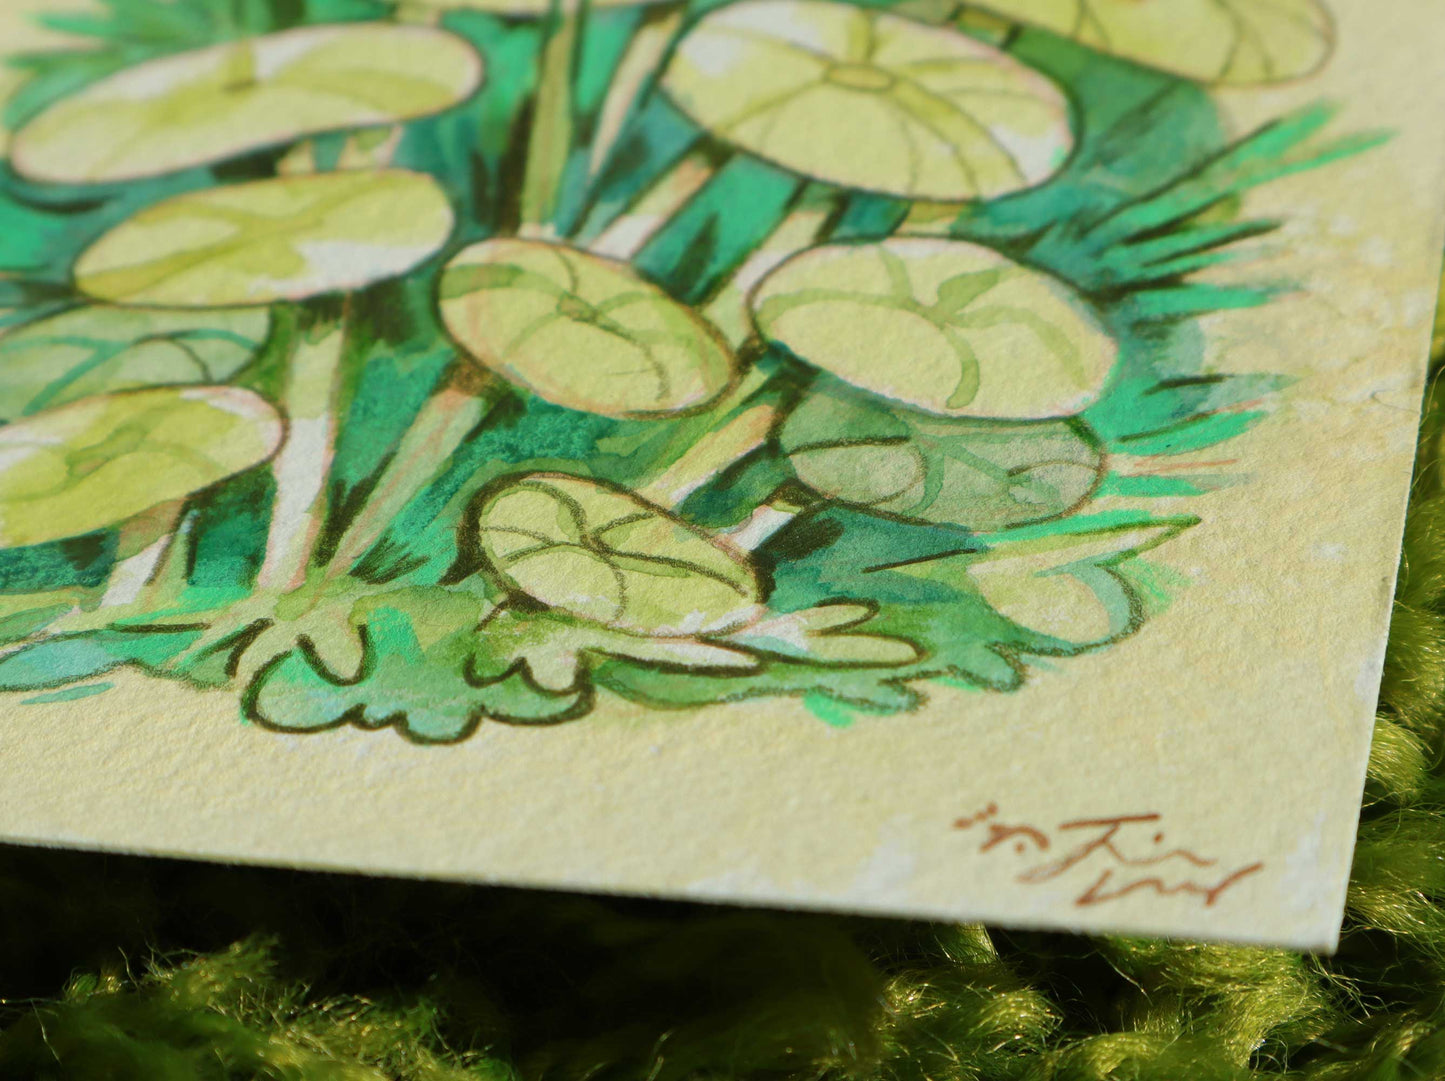 Little Green Frogs - Original Painting